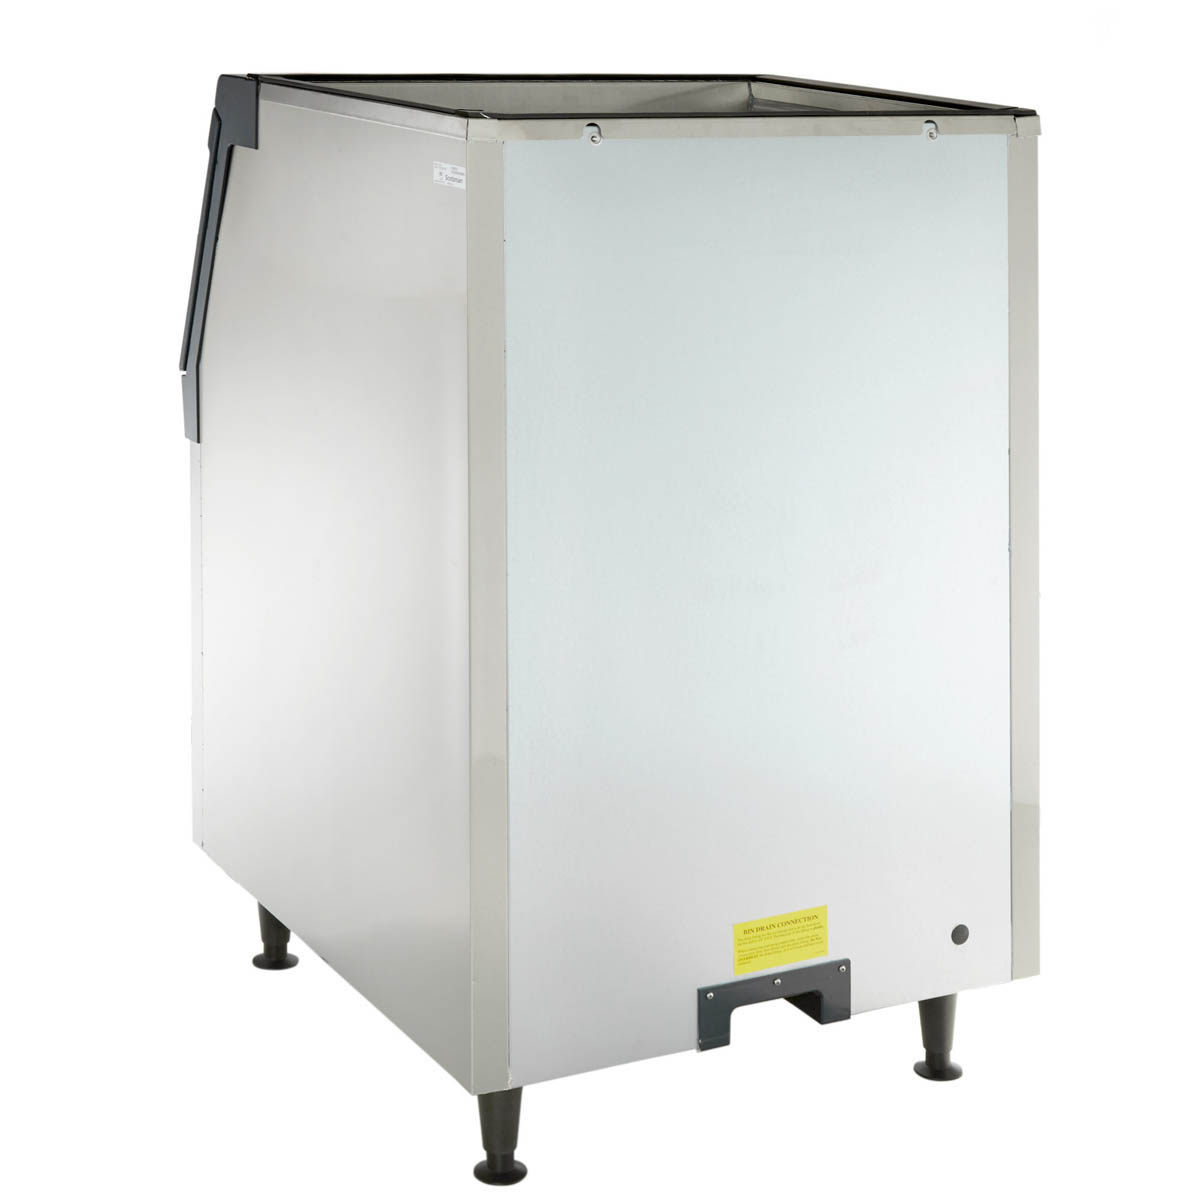 Scotsman B530S Is An Effective Way To Keep Your Ice Supply Cool and Available, Chef's Deal